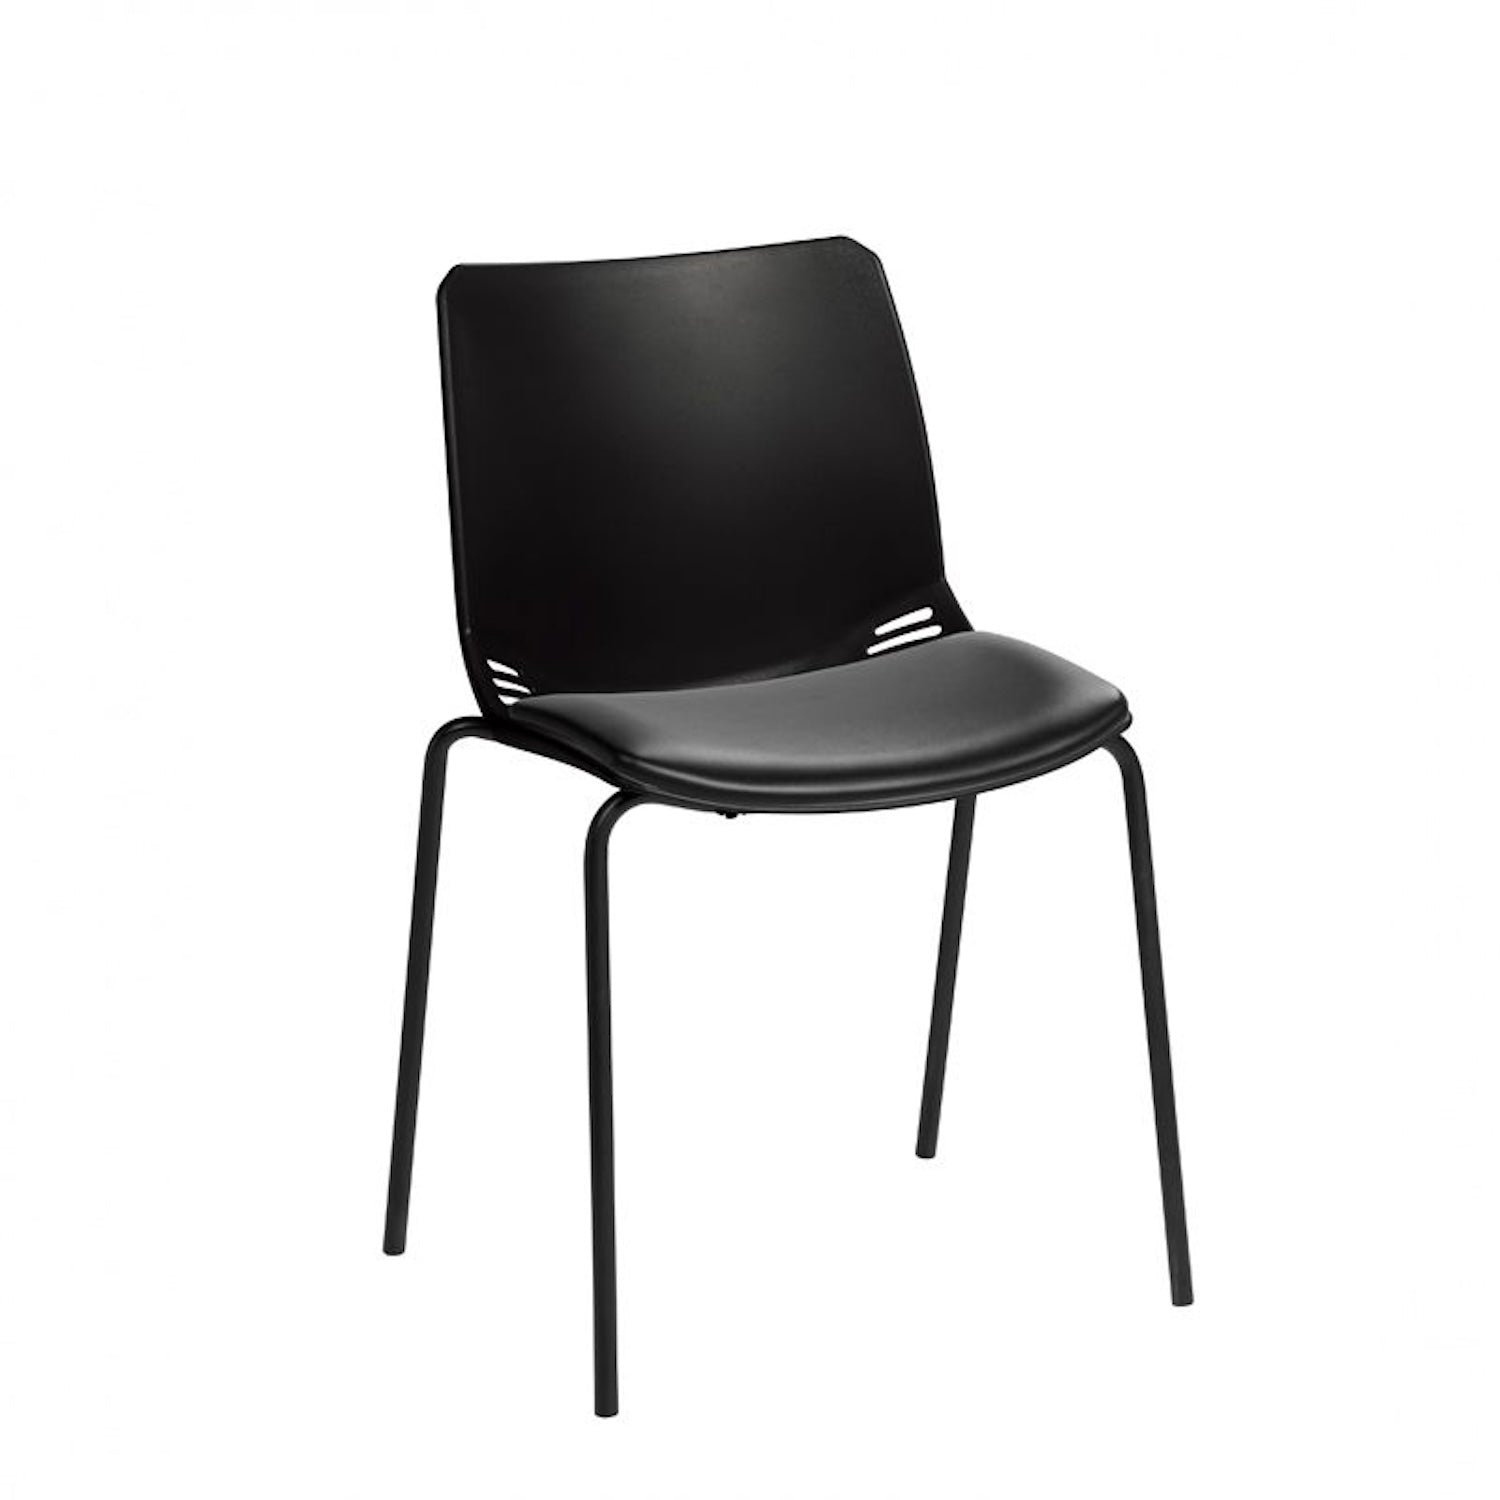 Neptune Visitor Chair (No Arms) | Vinyl Upholstered, Black Seat Pad